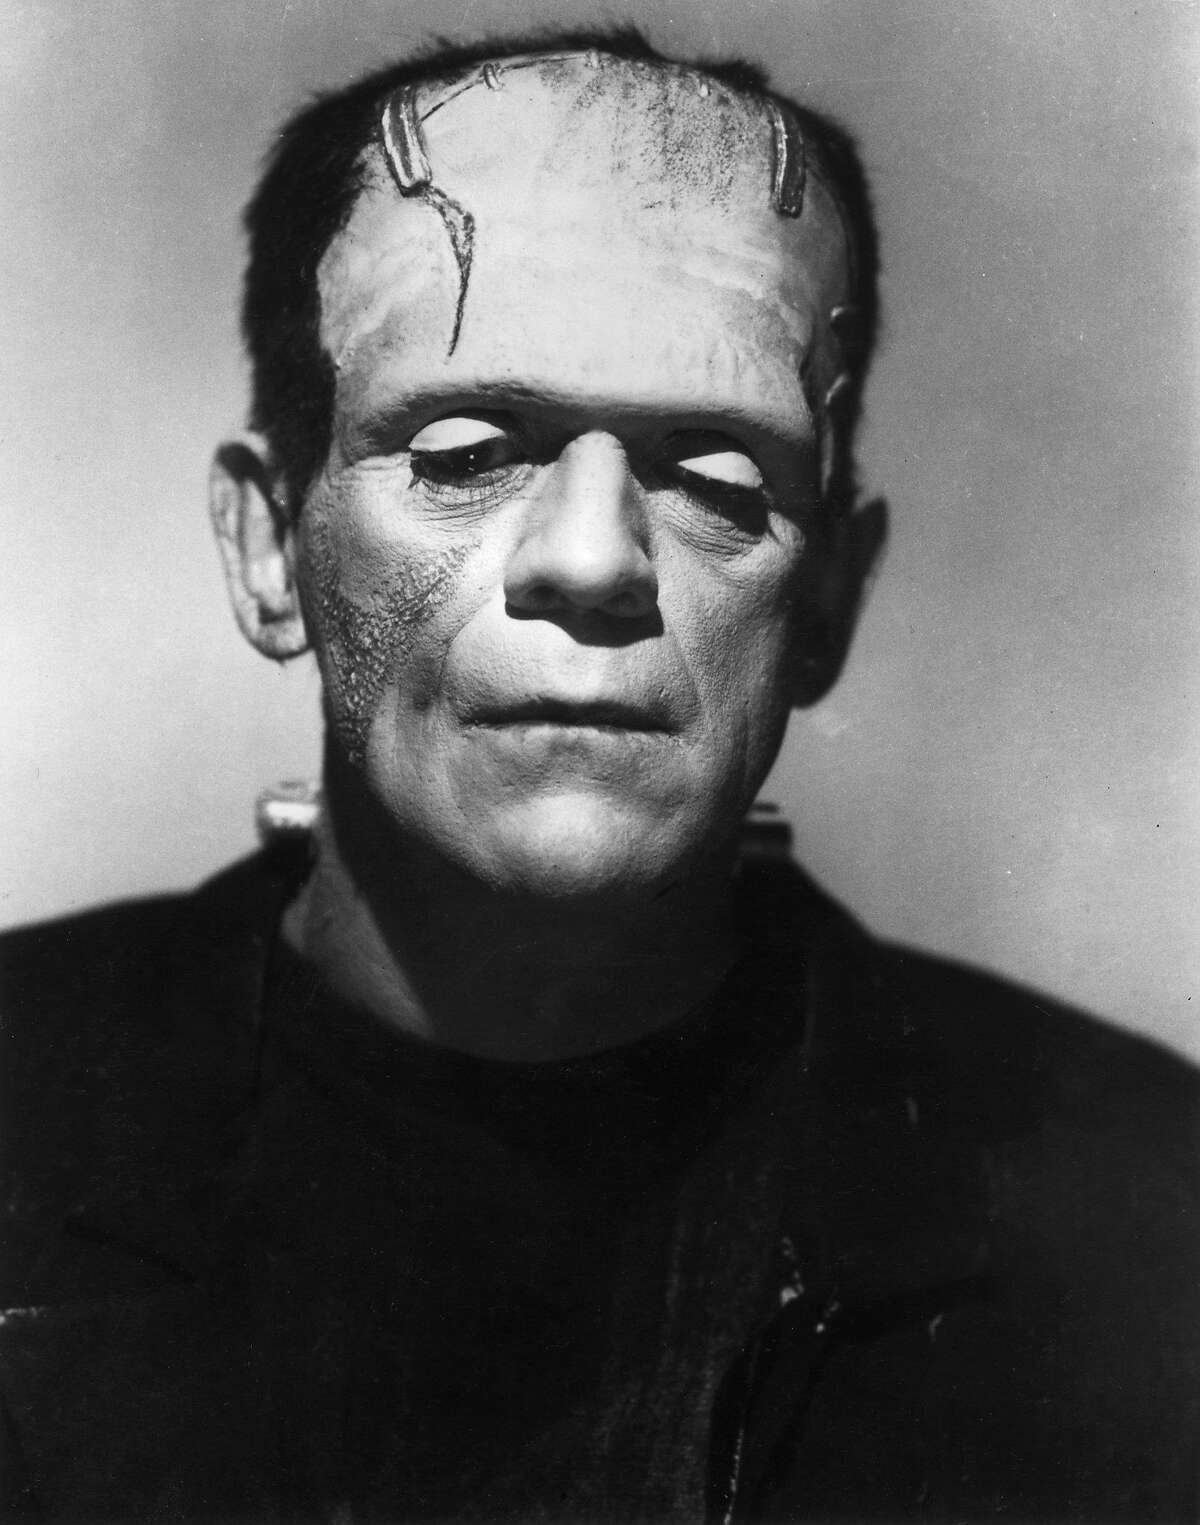 1931: British actor Boris Karloff lowers his eyes as the Monster in a promotional portrait for director James Whale's film, 'Frankenstein'. (Photo by Hulton Archive/Getty Images)